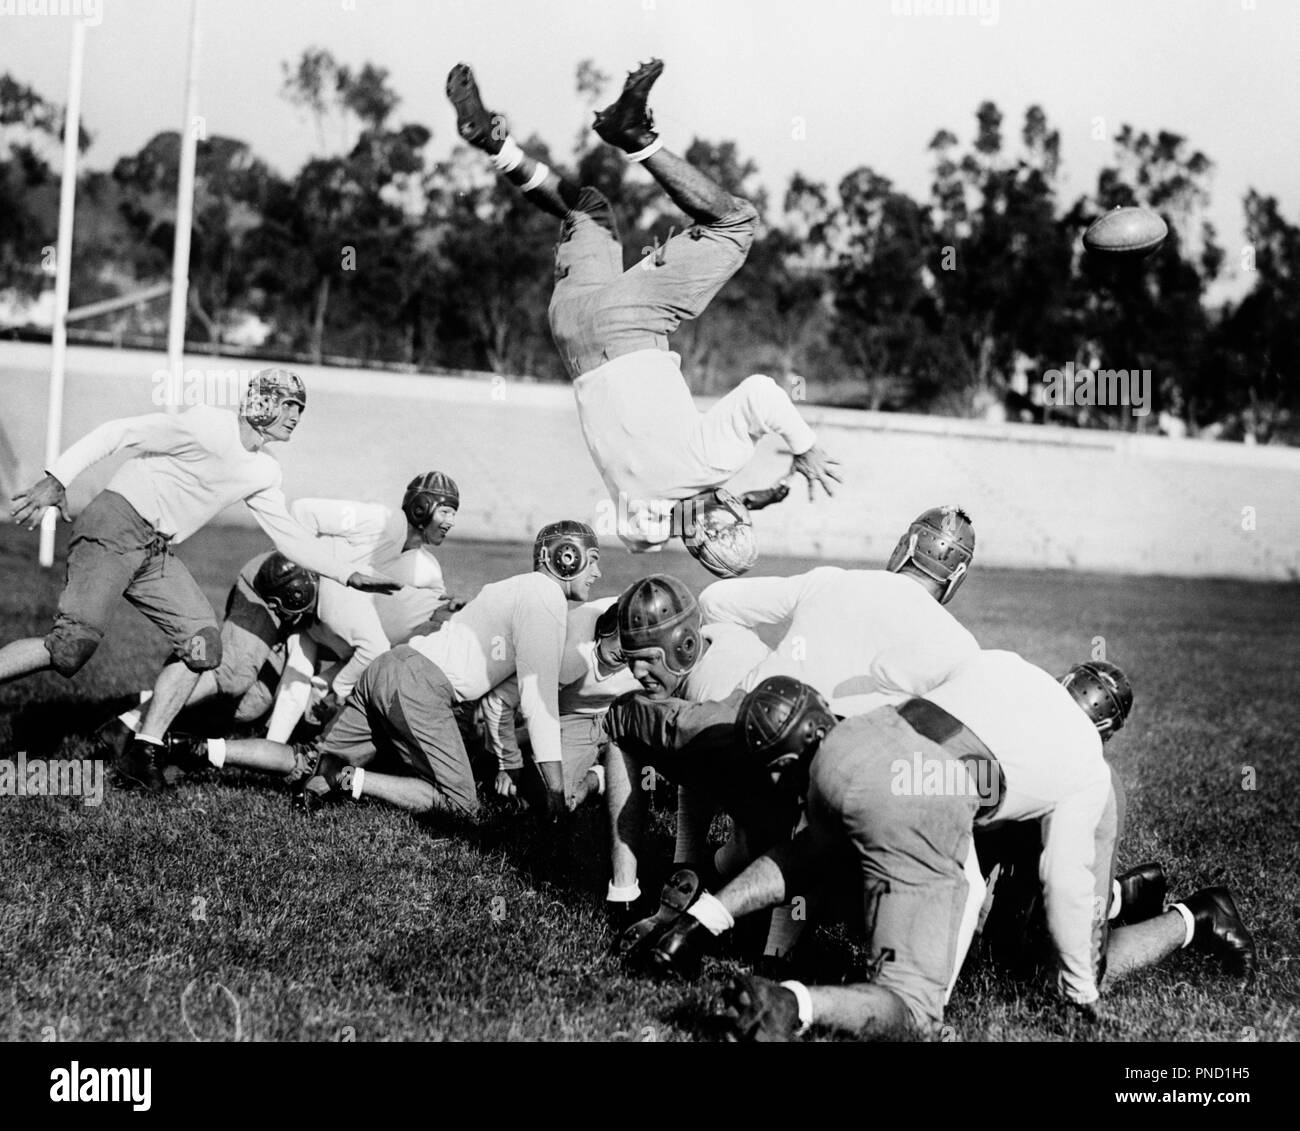 1930s 1940s LEATHER HELMET ERA FOOTBALL SCRIMMAGE LINE ONE PLAYER UPSIDE DOWN IN MIDAIR - gp0087 CAM001 HARS HORIZONTAL COPY SPACE PHYSICAL FITNESS PERSONS PRACTICE MALES ATHLETIC TACKLE AMERICANA B&W GOALS ACTIVITY PHYSICAL STRENGTH UNIVERSITIES EXCITEMENT QUARTERBACK RECREATION CAM001 UNIFORMS HIGHER EDUCATION ATHLETES FLEXIBILITY MIDAIR MUSCLES SCRIMMAGE COLLEGES HELMETS LEATHER HELMETS SACKED YOUNG ADULT MAN BLACK AND WHITE CAUCASIAN ETHNICITY ERA OLD FASHIONED UPSIDE DOWN Stock Photo